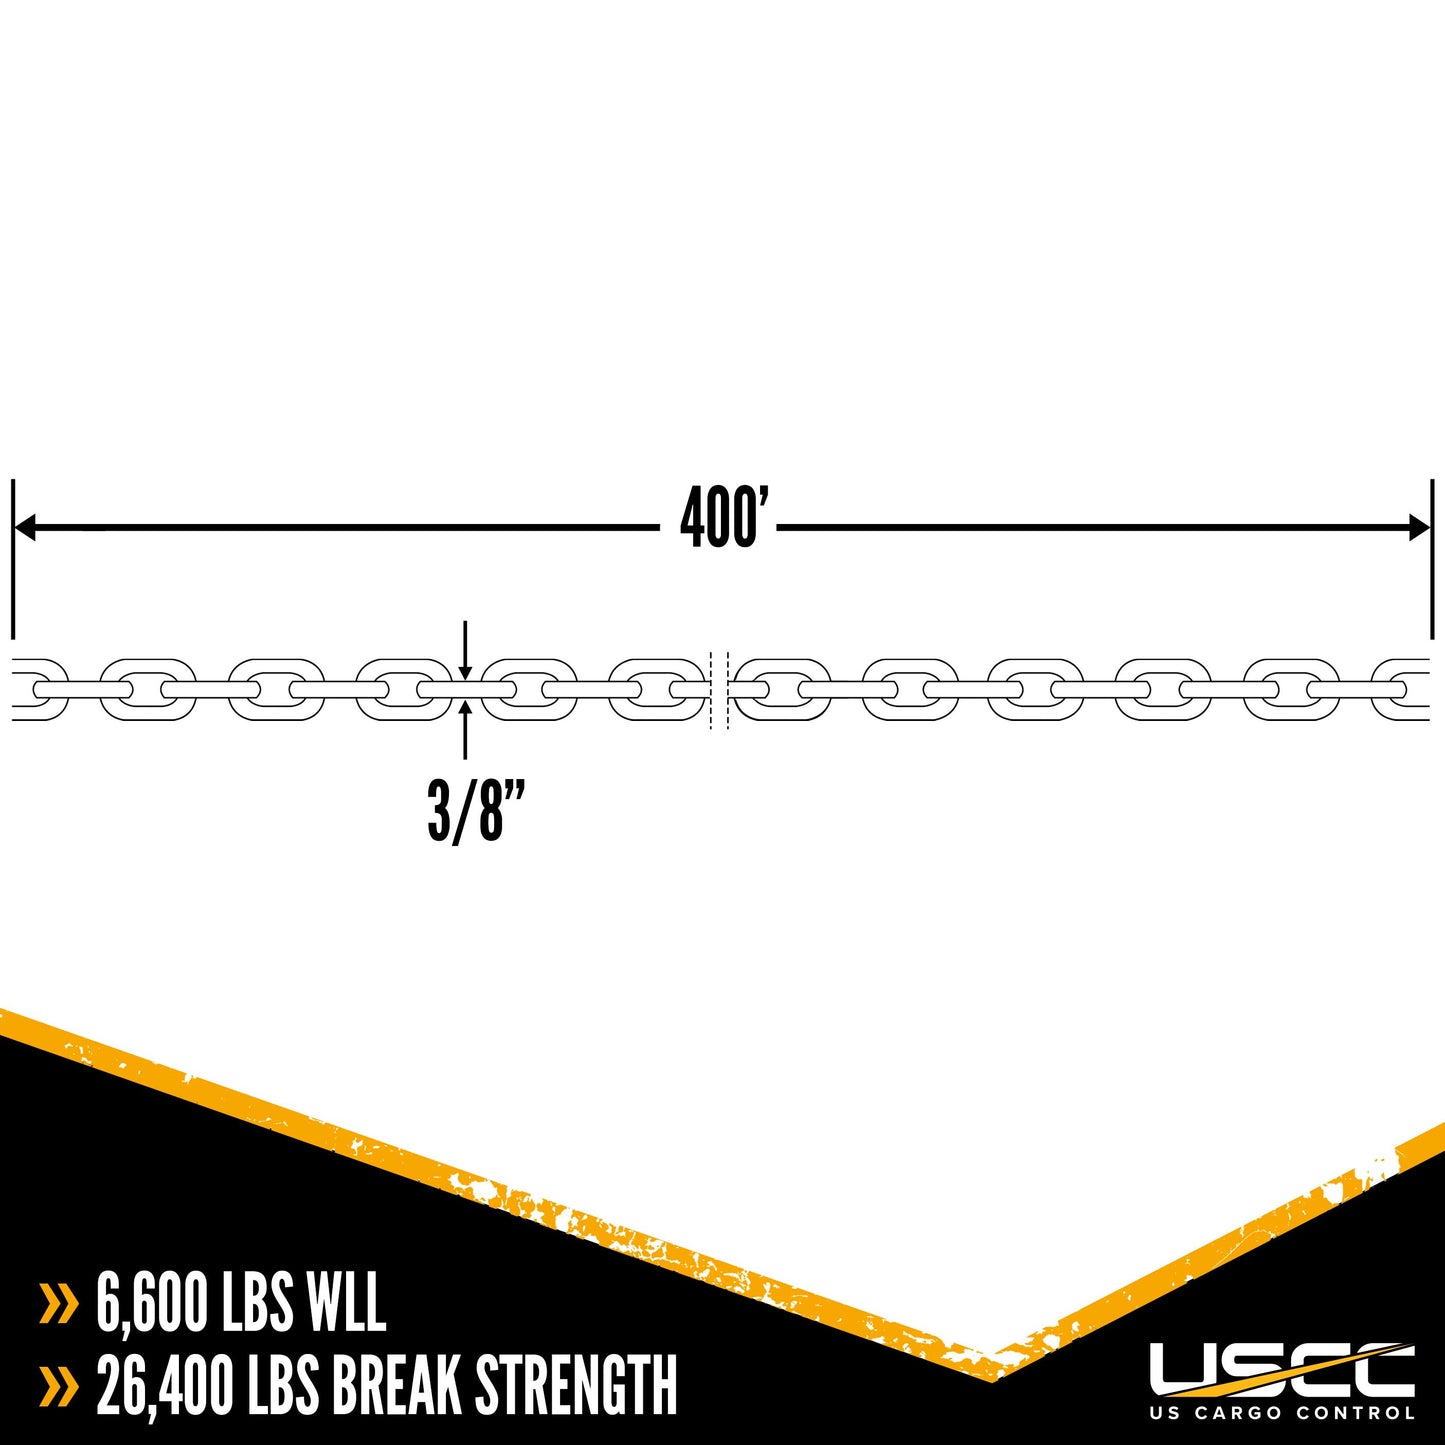 38 inch x 400 foot Transport Chain Drum Grade 70 image 4 of 7